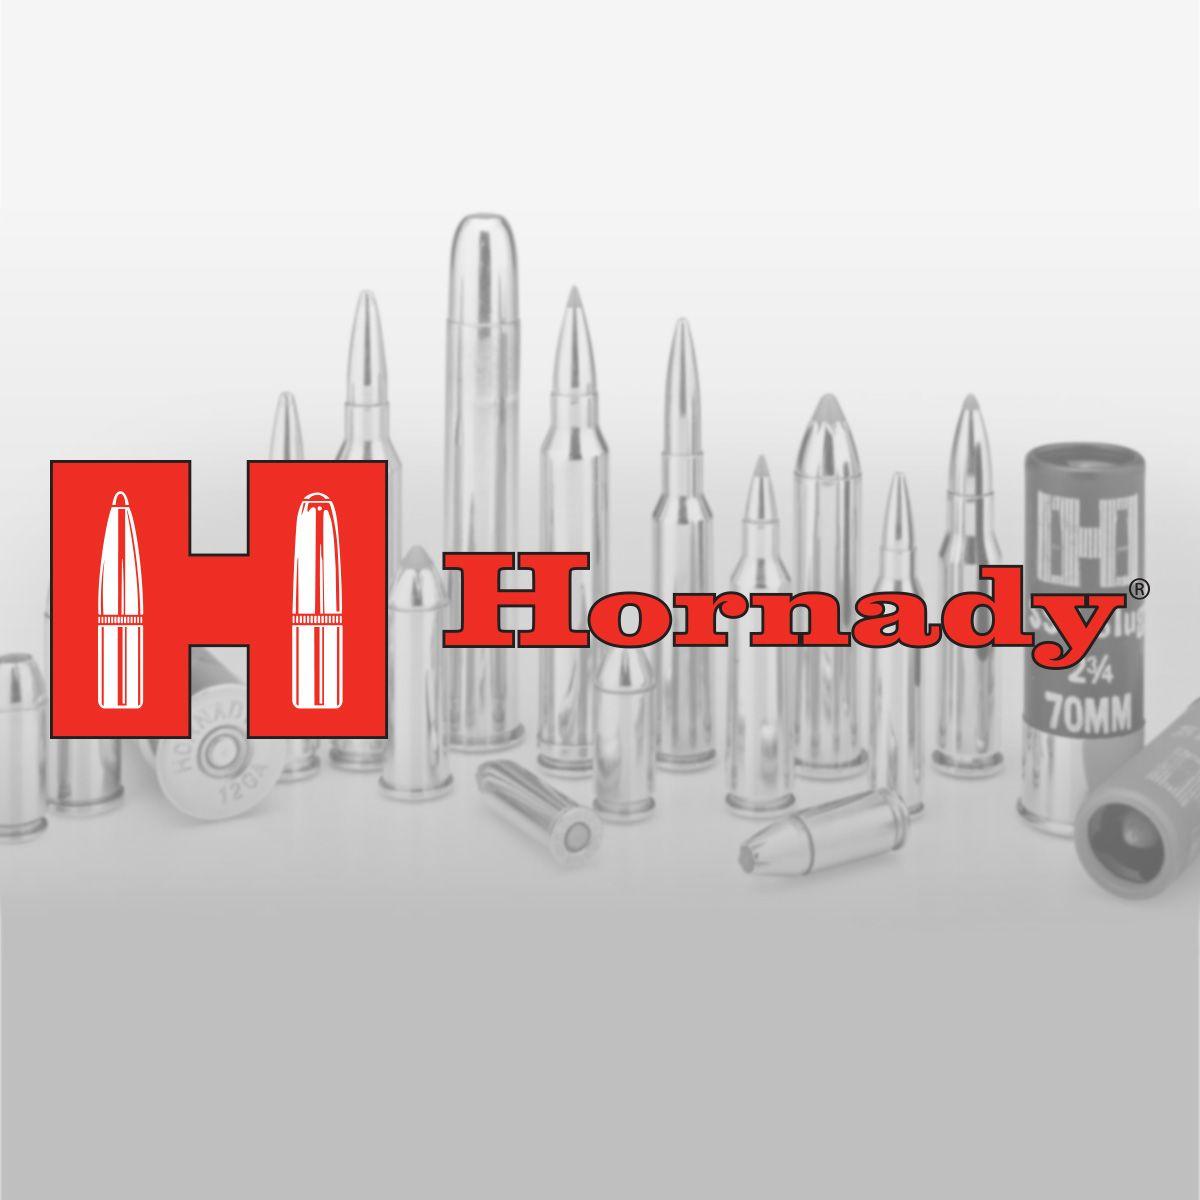 Hornandy Logo - Accurate, Deadly, Dependable - Hornady Manufacturing, Inc